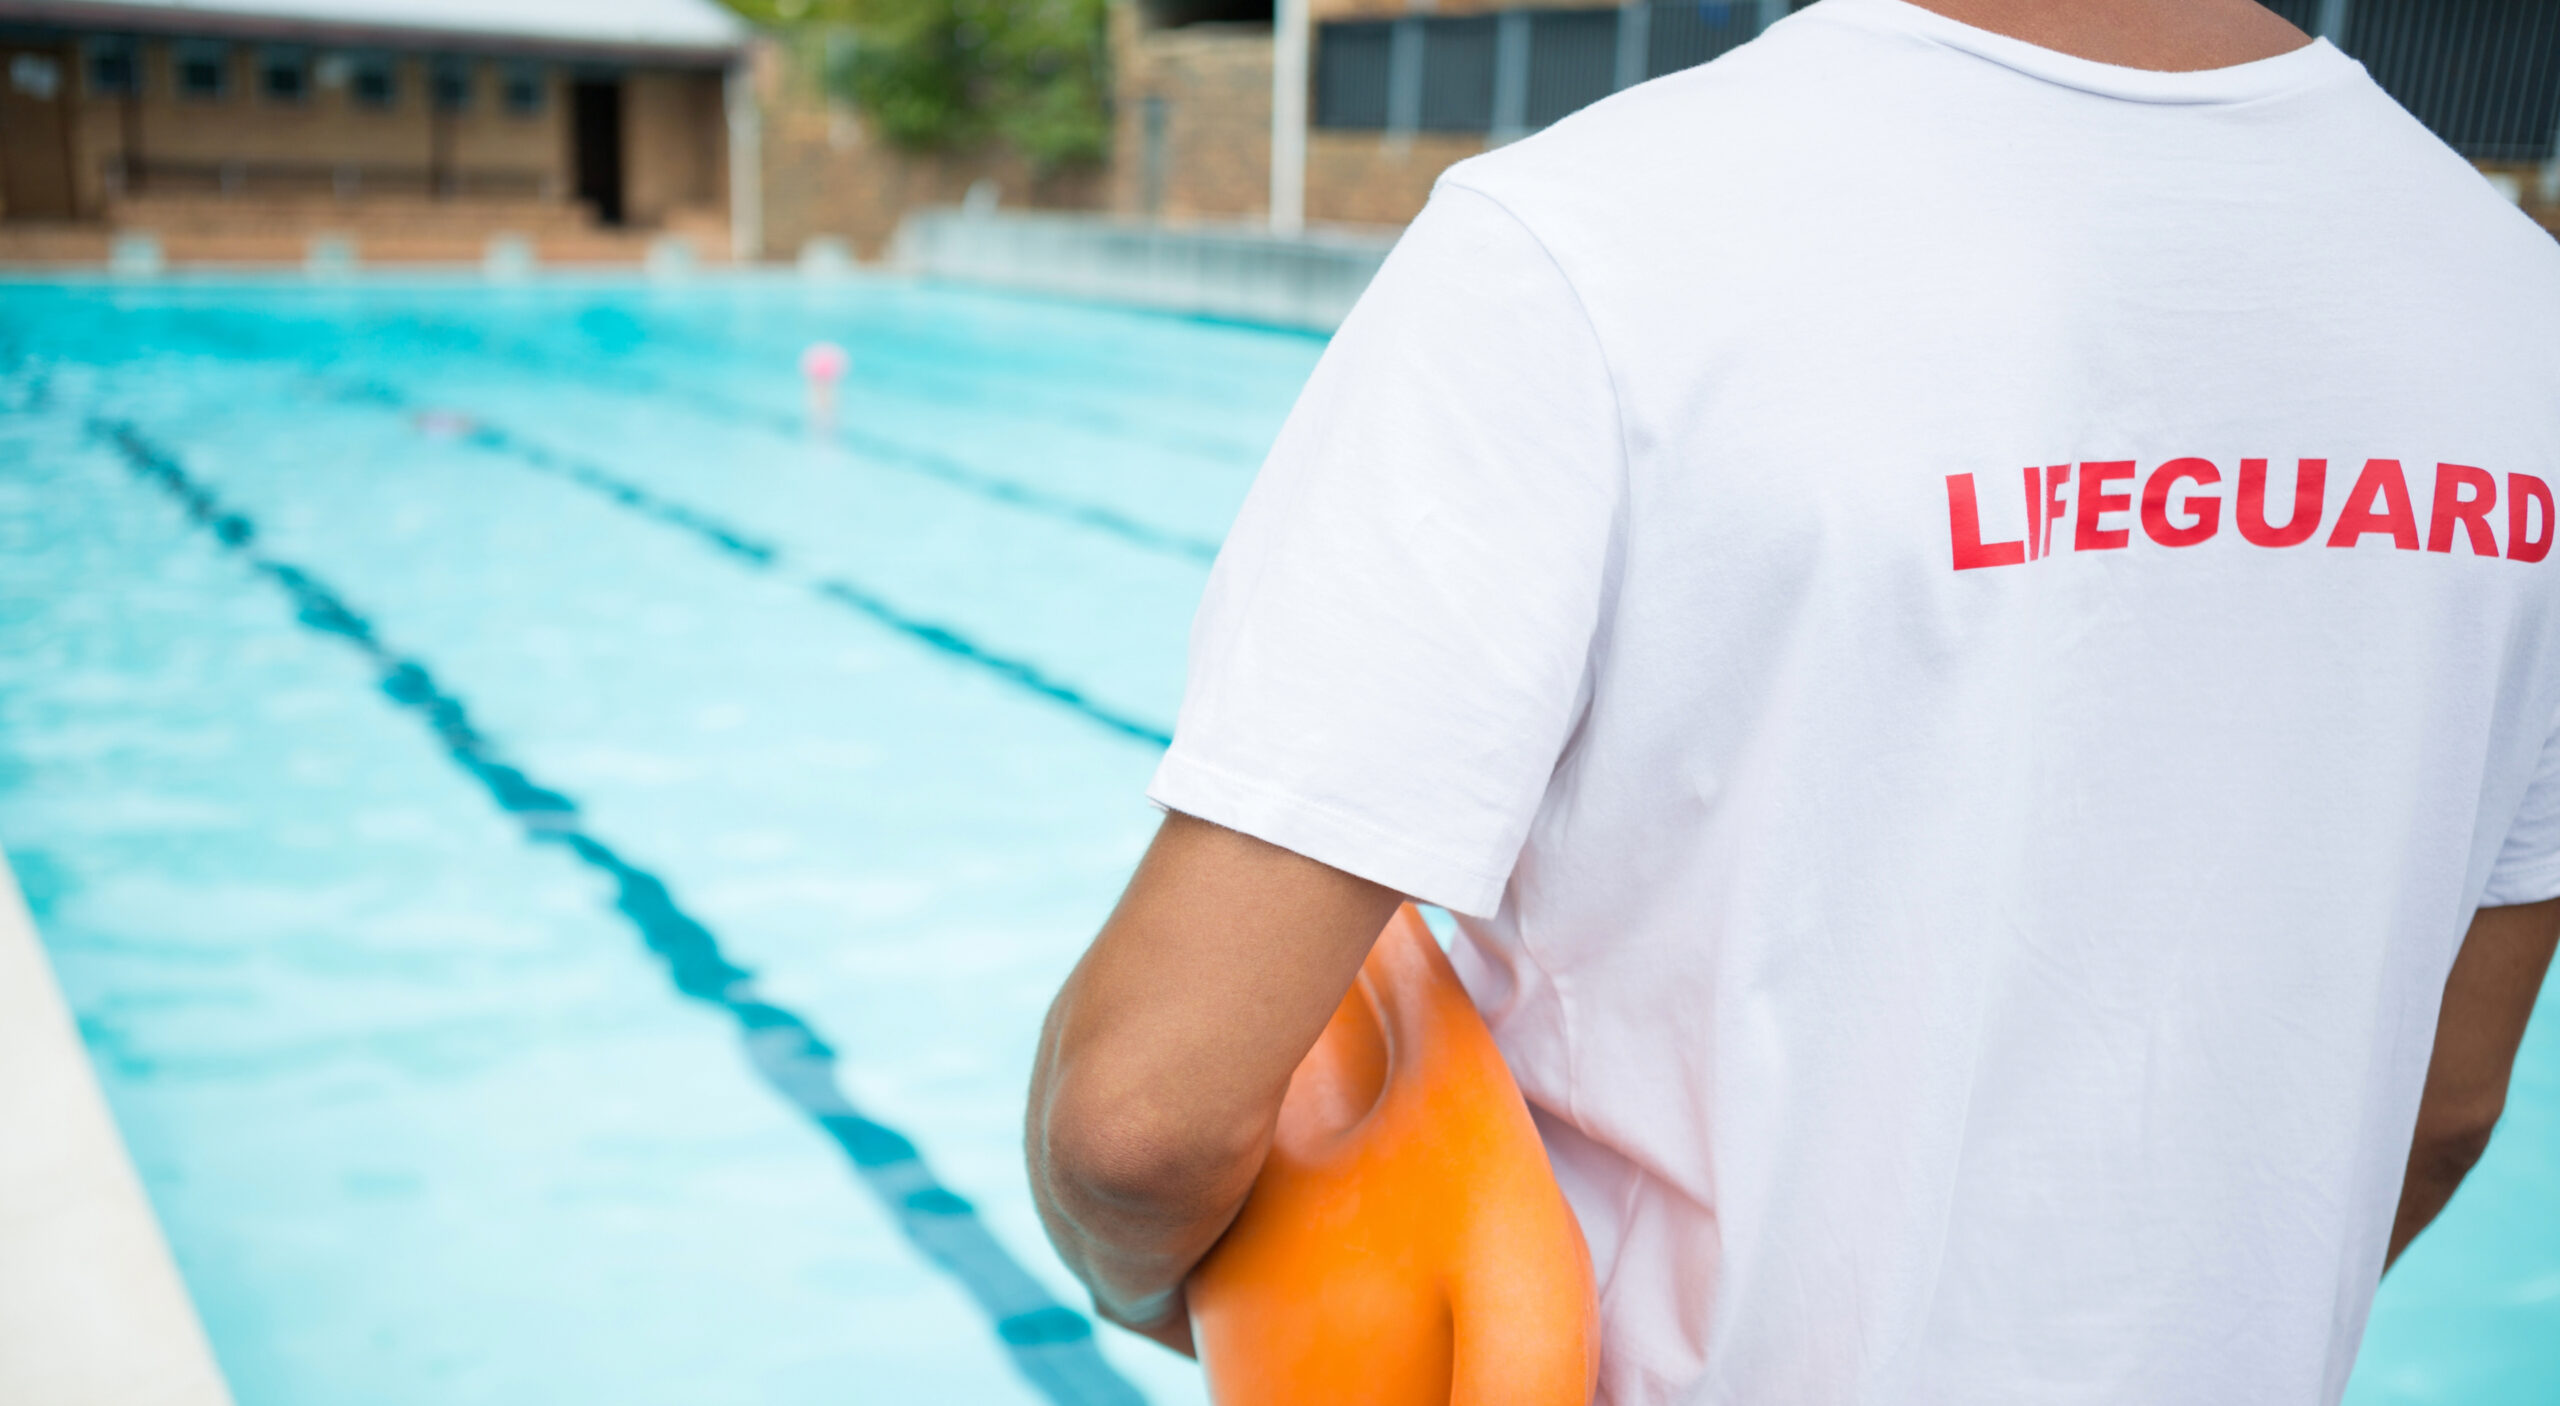 Lifeguard standing with rescue buoy poolside